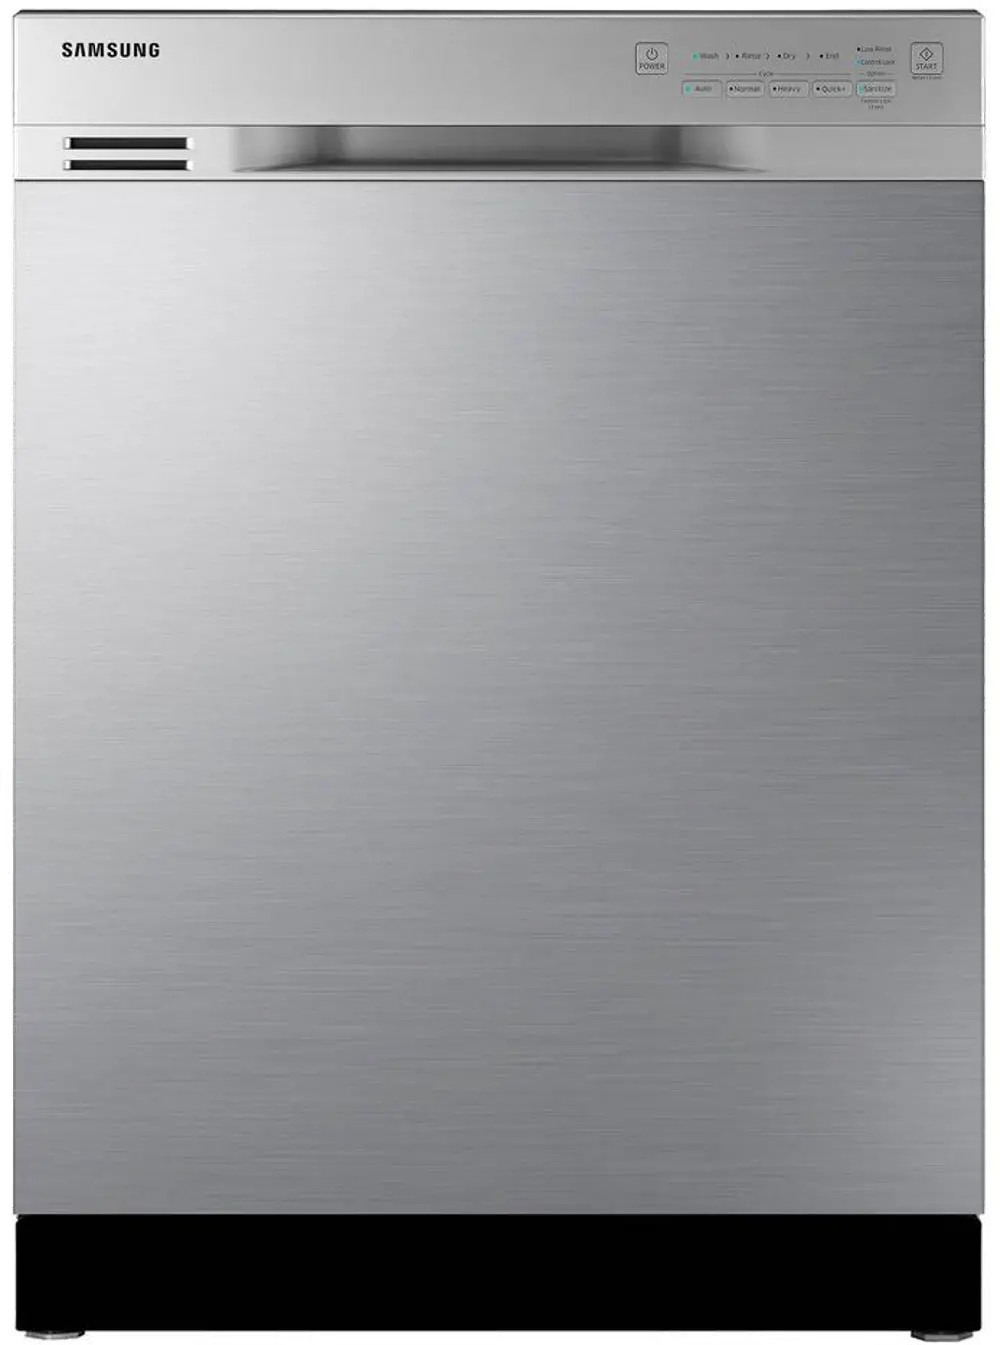 DW80J3020US Samsung Front Control Dishwasher - Stainless Steel-1